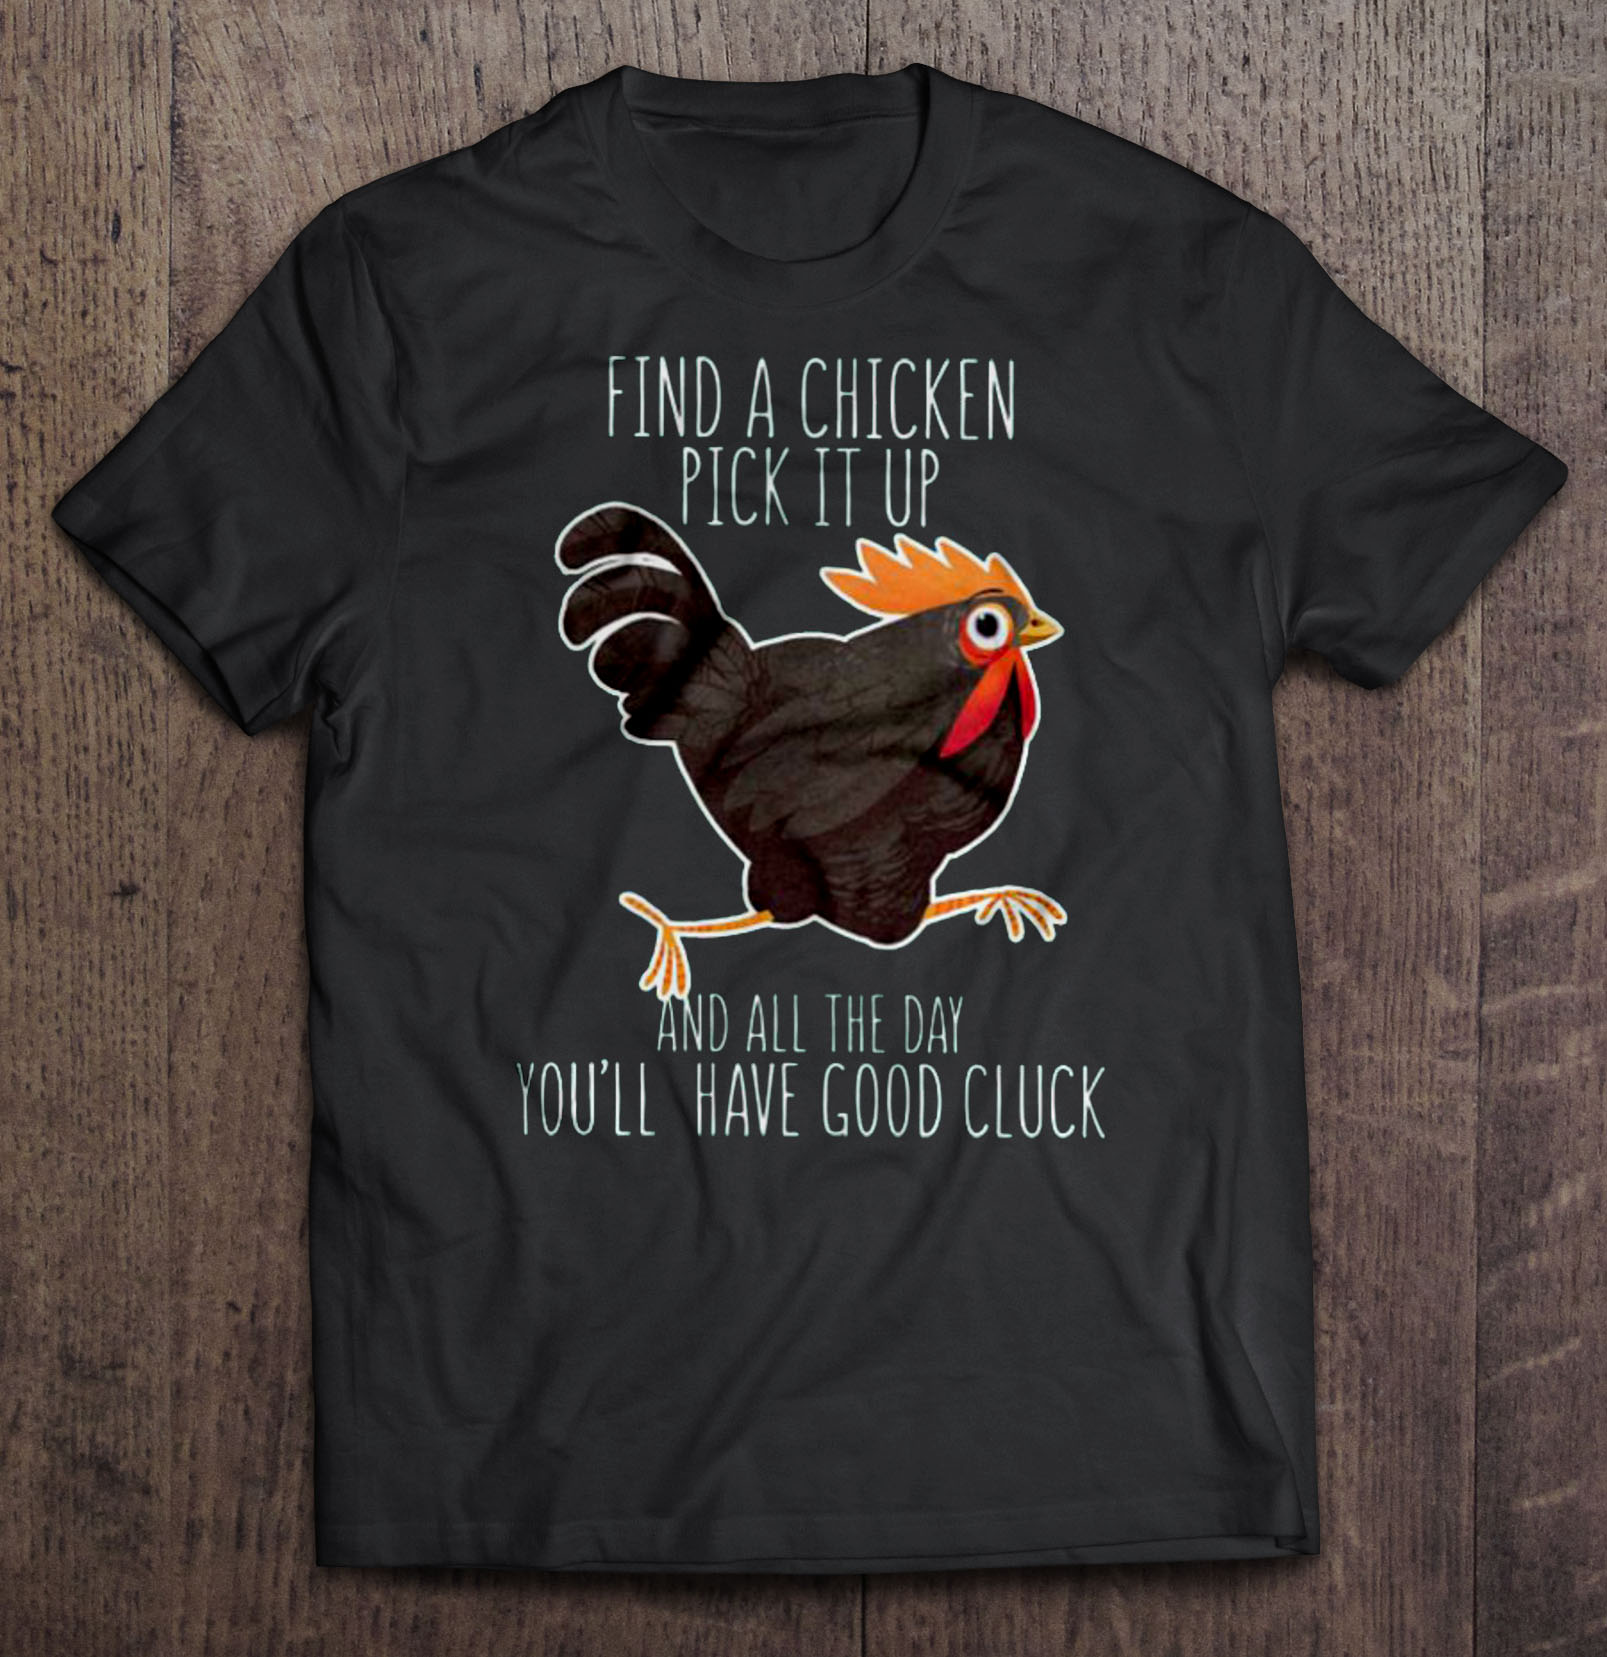 Find A Chicken Pick It Up And All The Day You'll Have Good Cluck Shirt ...